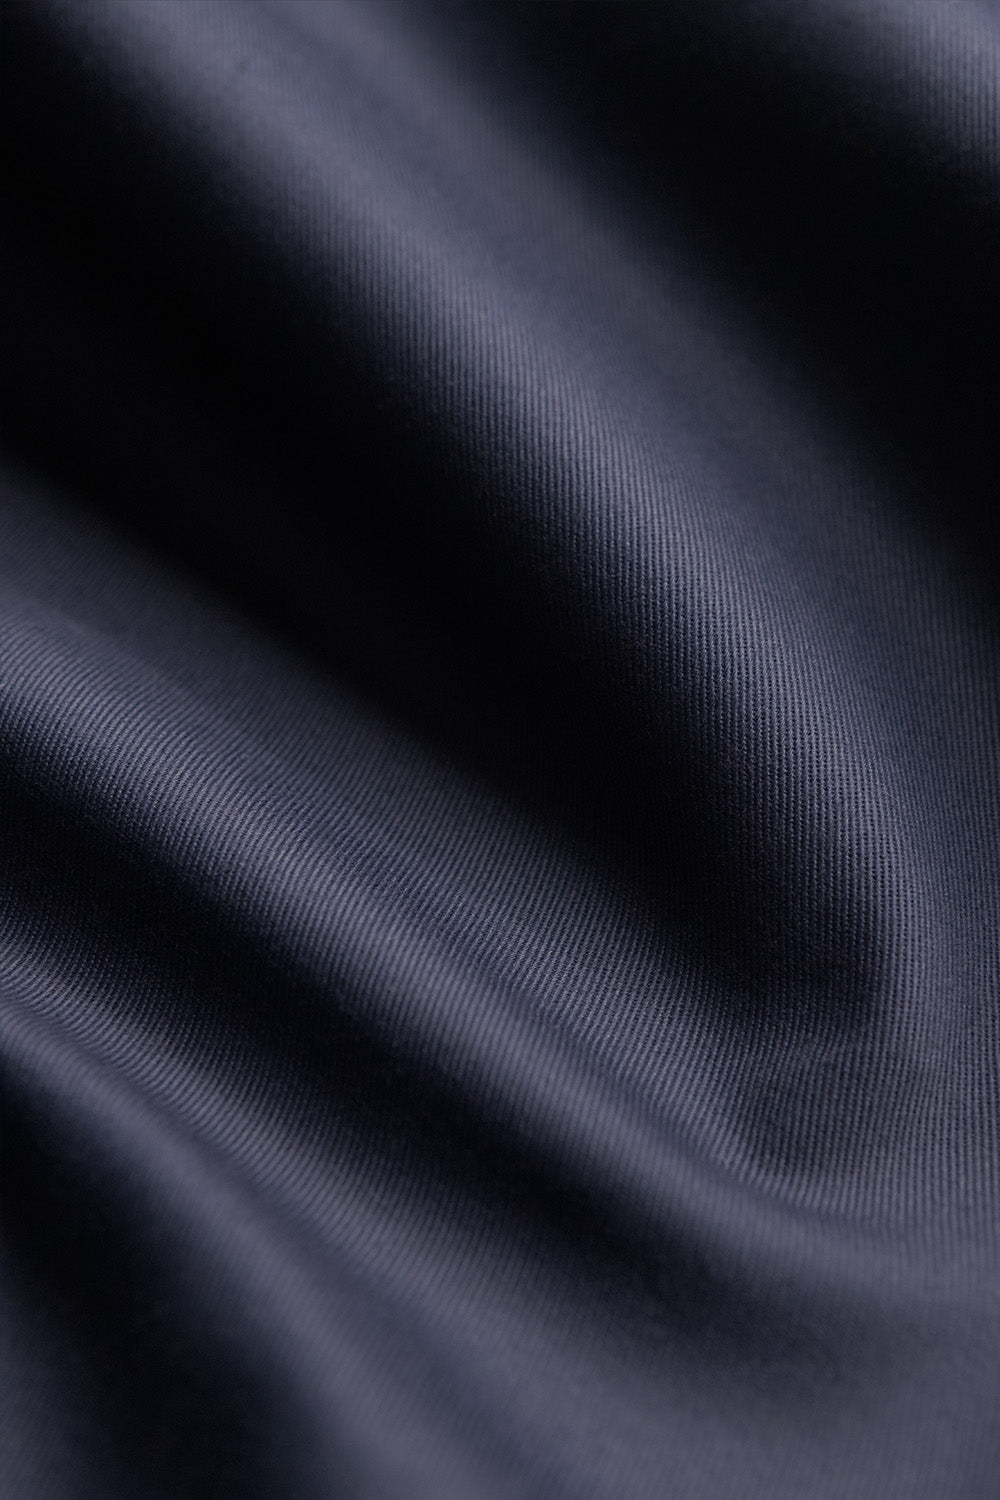 100% cotton fabric in navy blue color - perfect for sewing kits and crafting projects